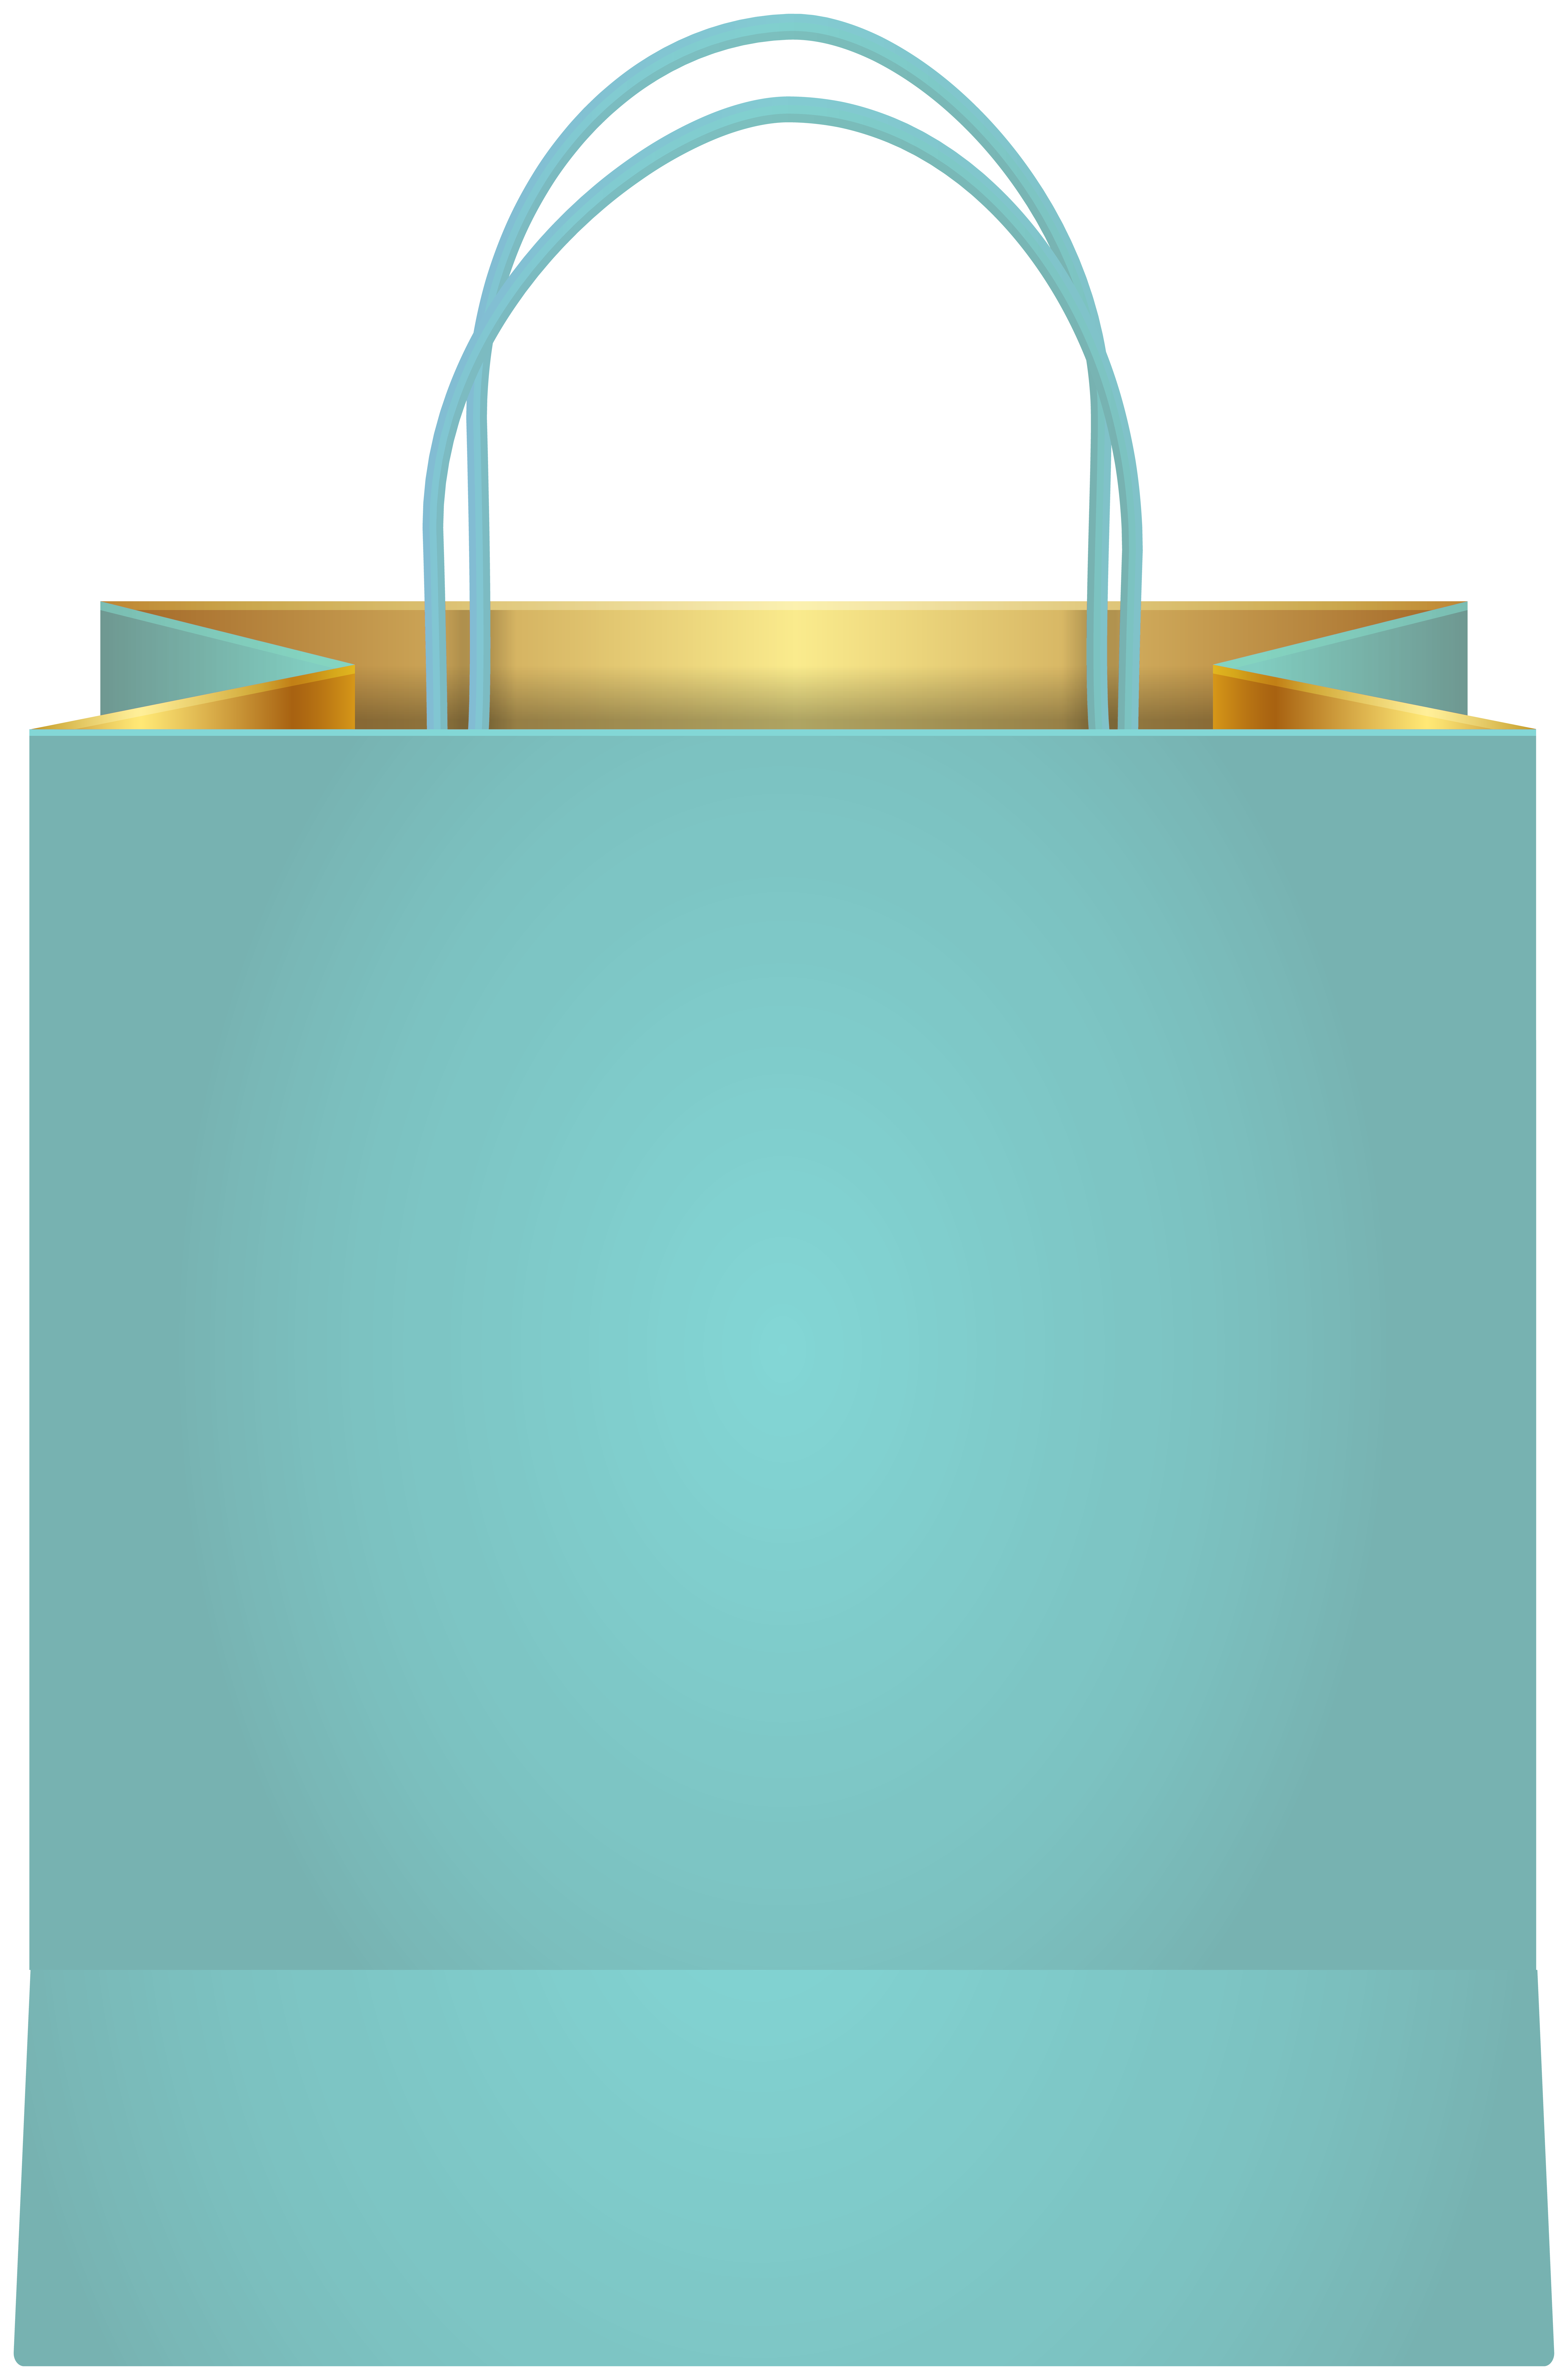 Gift Bag PNG Clipart​  Gallery Yopriceville - High-Quality Free Images and Transparent  PNG Clipart